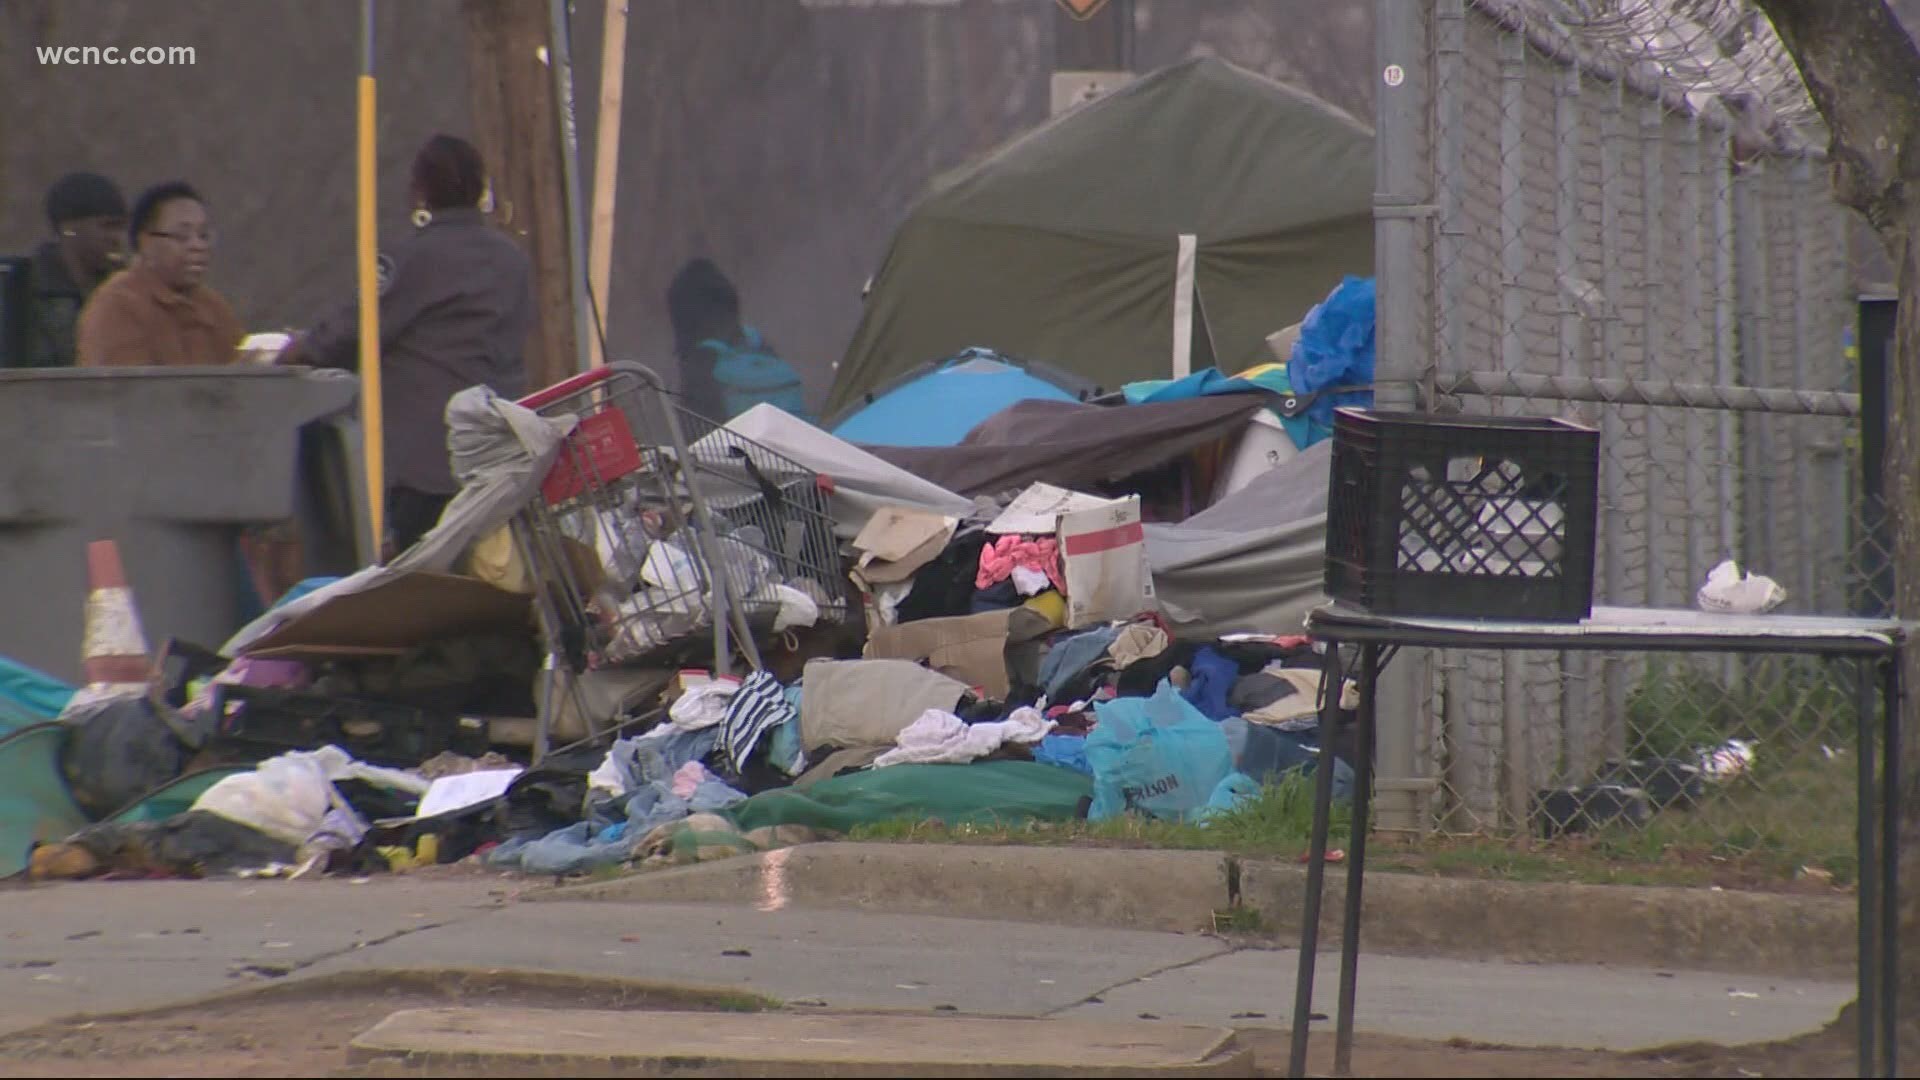 All tent city residents are asked to vacate by 5 p.m. on Friday.